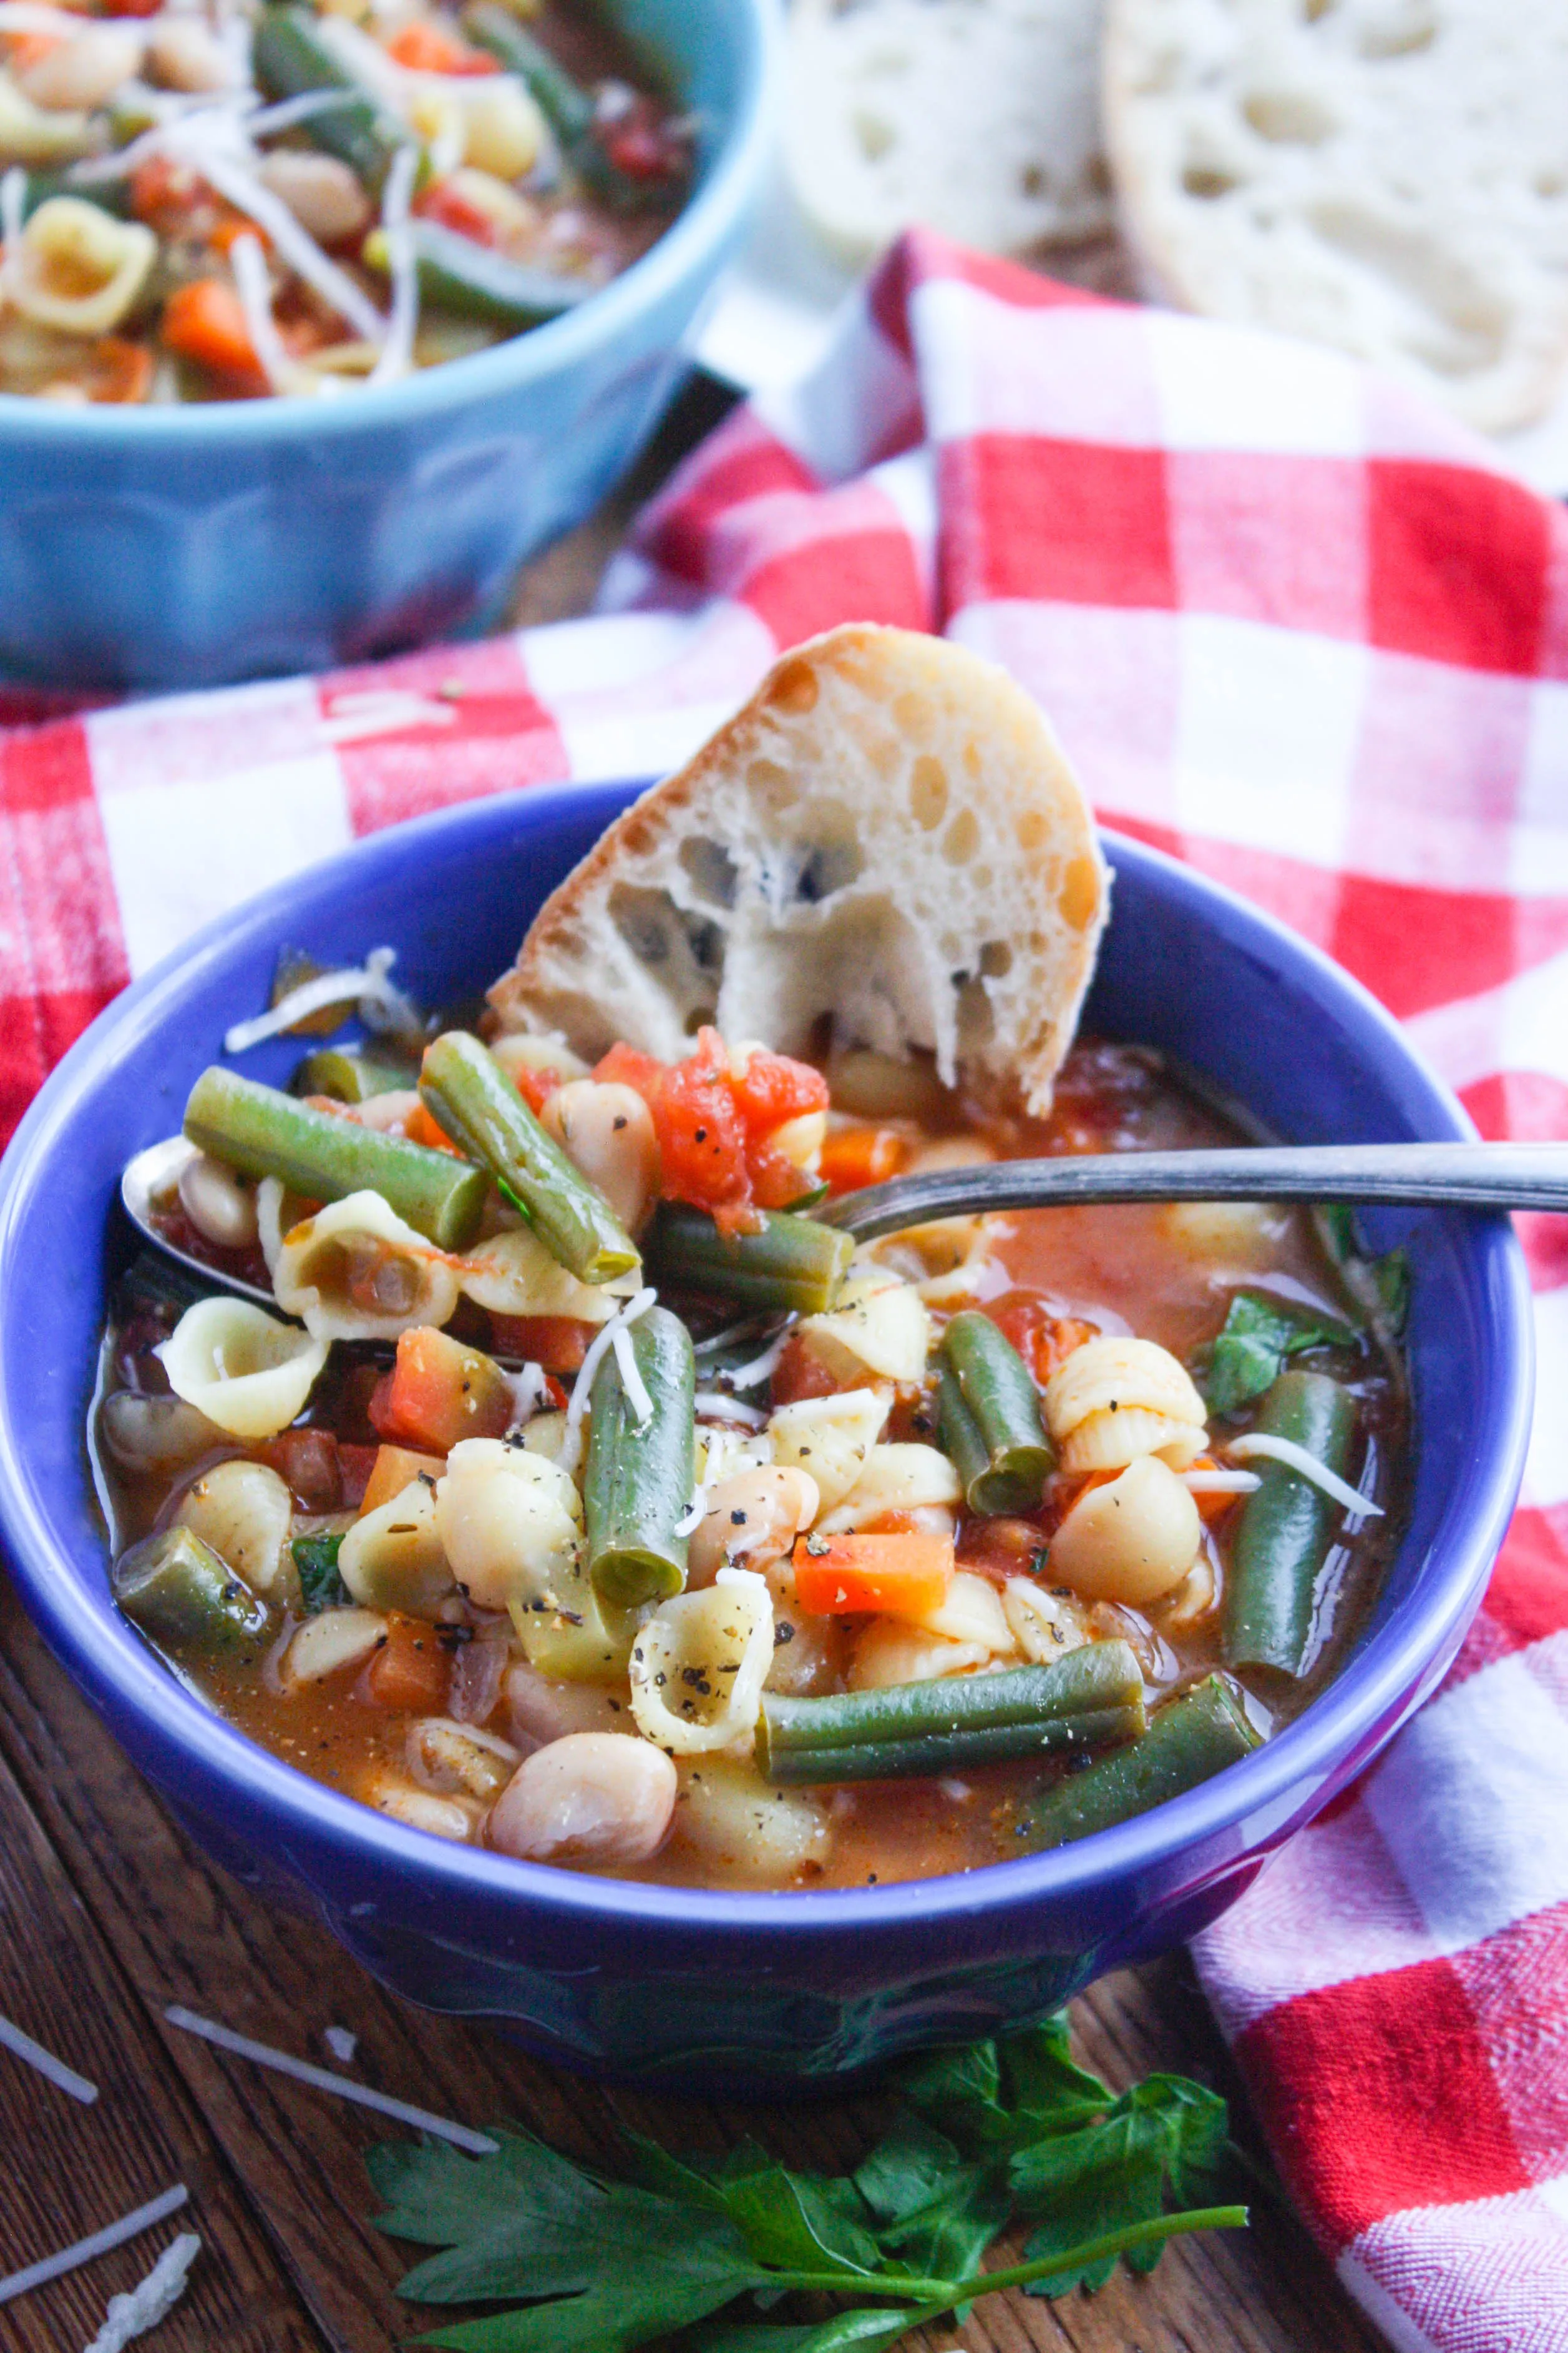 Minestrone Soup is a colorful soup that's so easy to make. You'll love minestrone soup for its wonderful flavor and all its tasty ingredients.